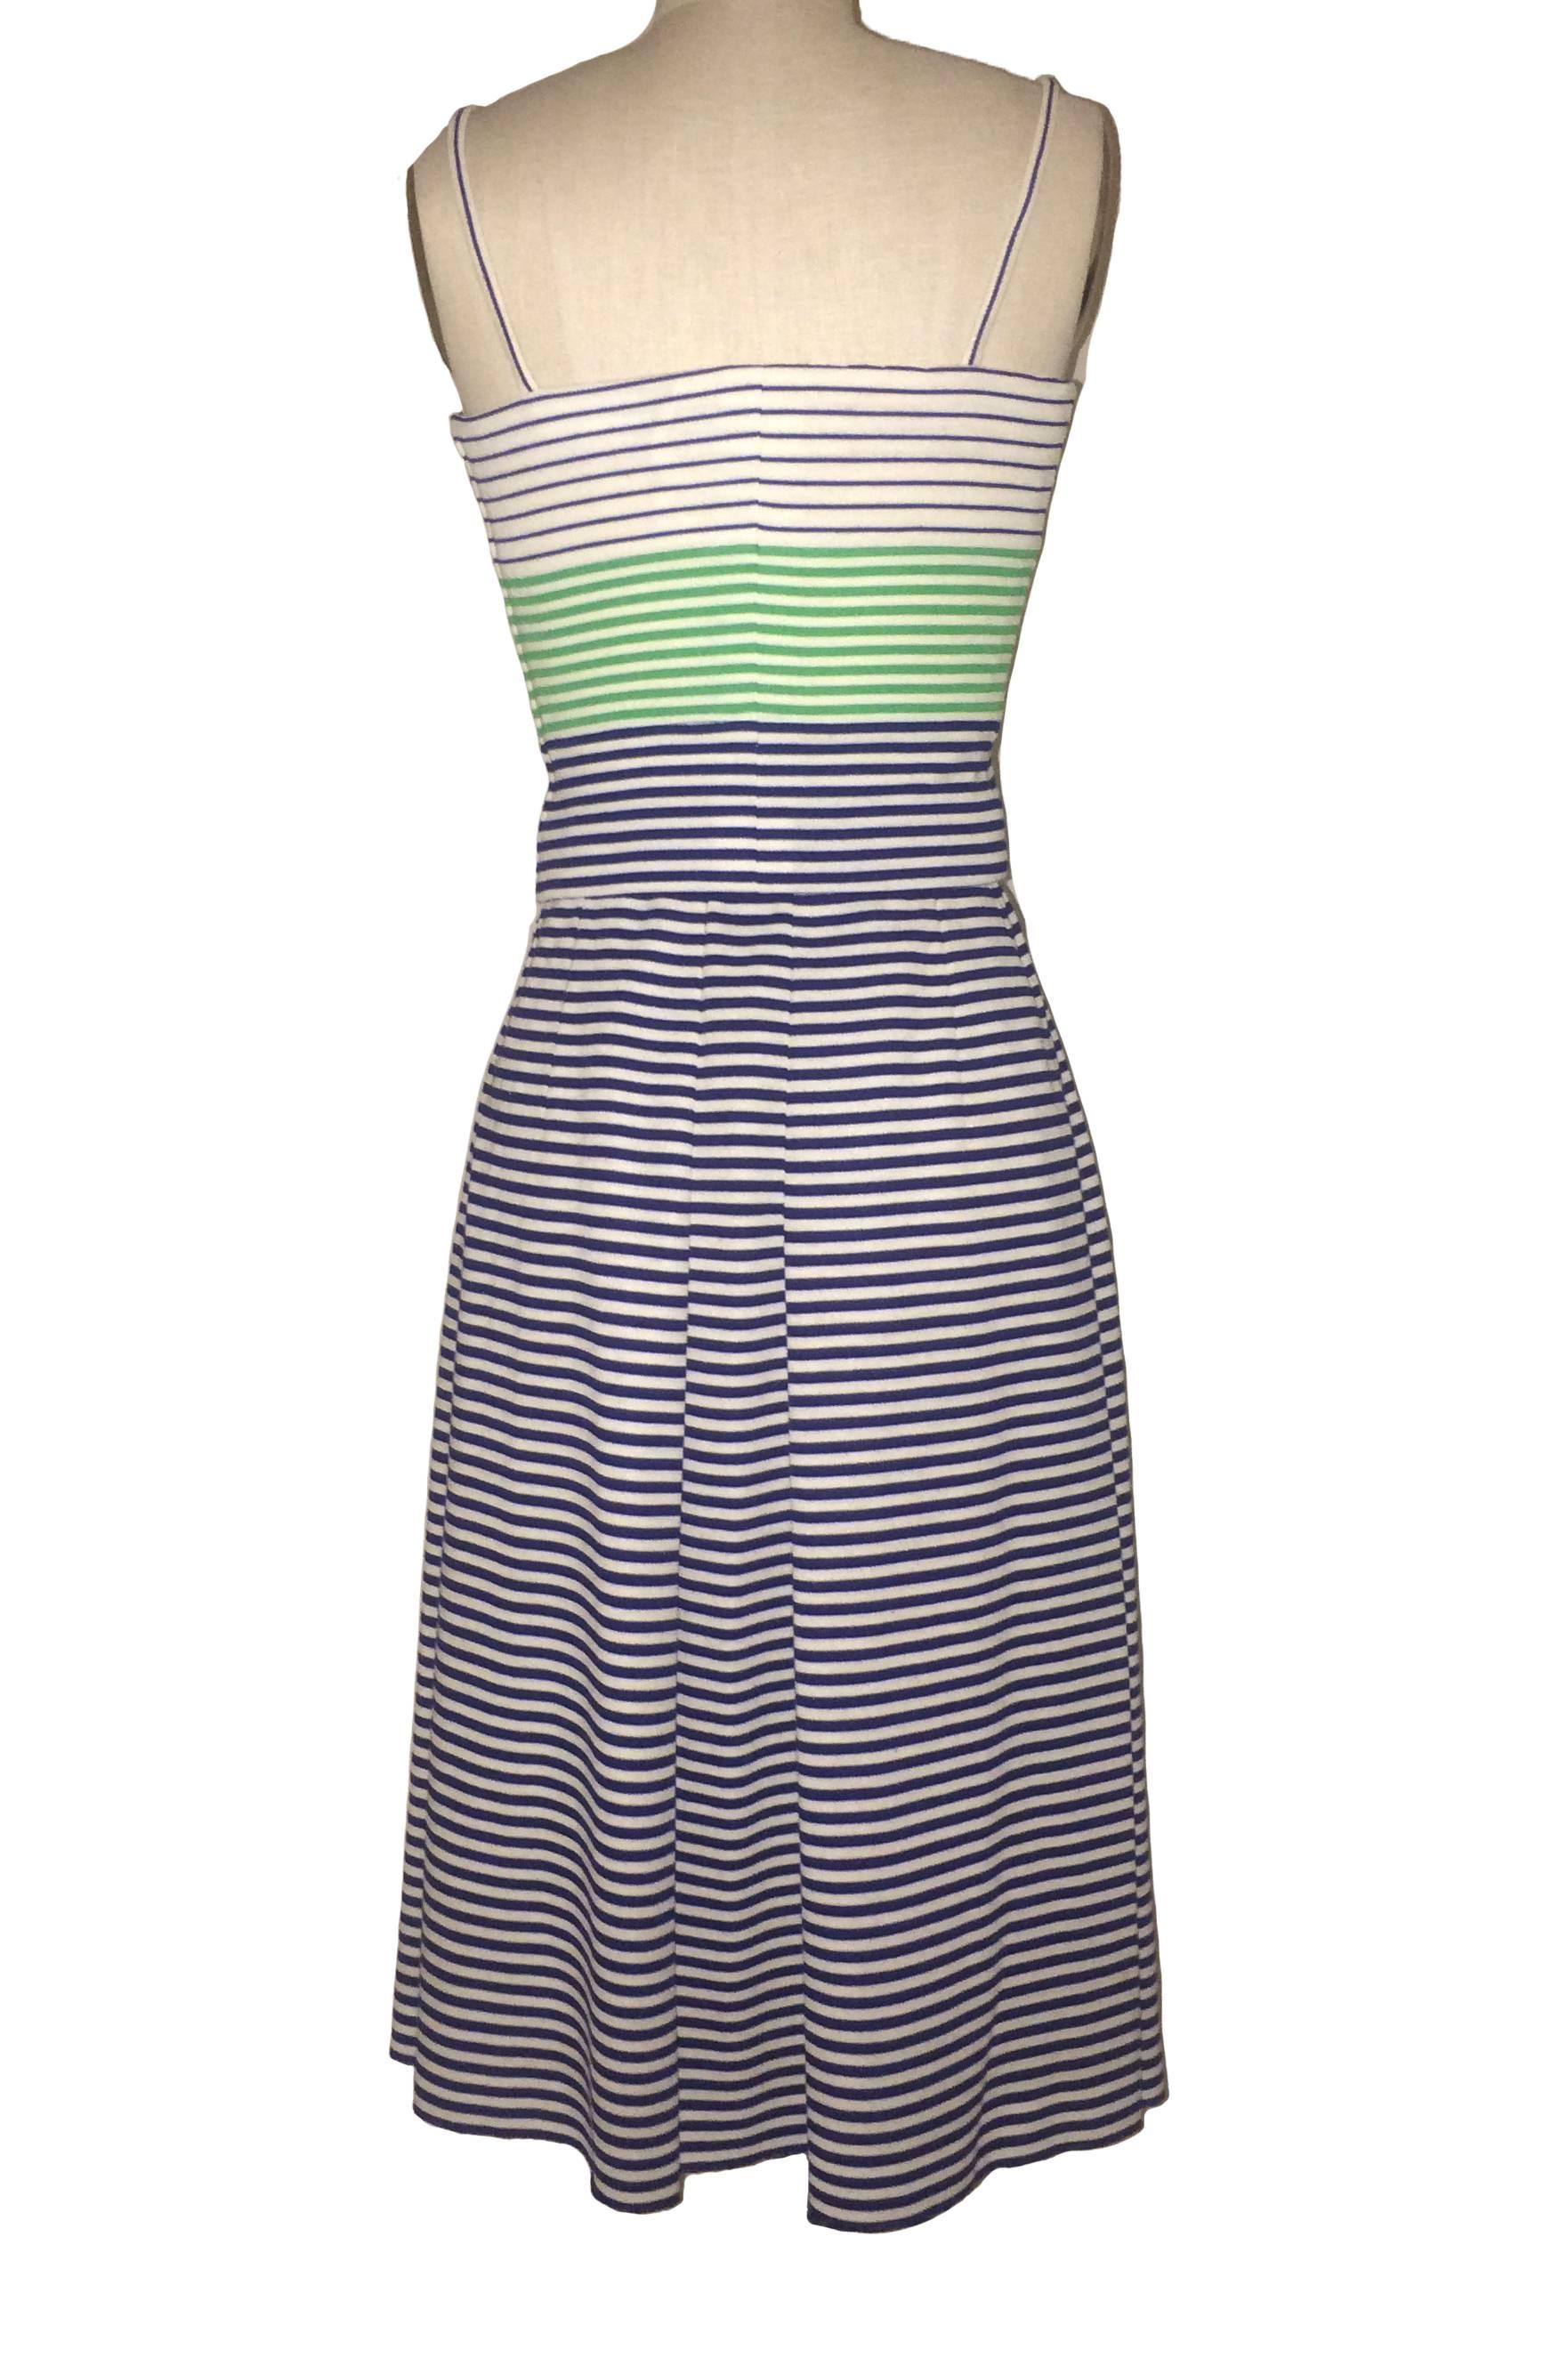 Lanvin vintage 1960s blue, white and green cropped spaghetti strap top with side zip. Wired at non-zip side for structure. 

Blue and white striped full skirt with front and black center pleats. Metal side zip with double hook and eye and button.